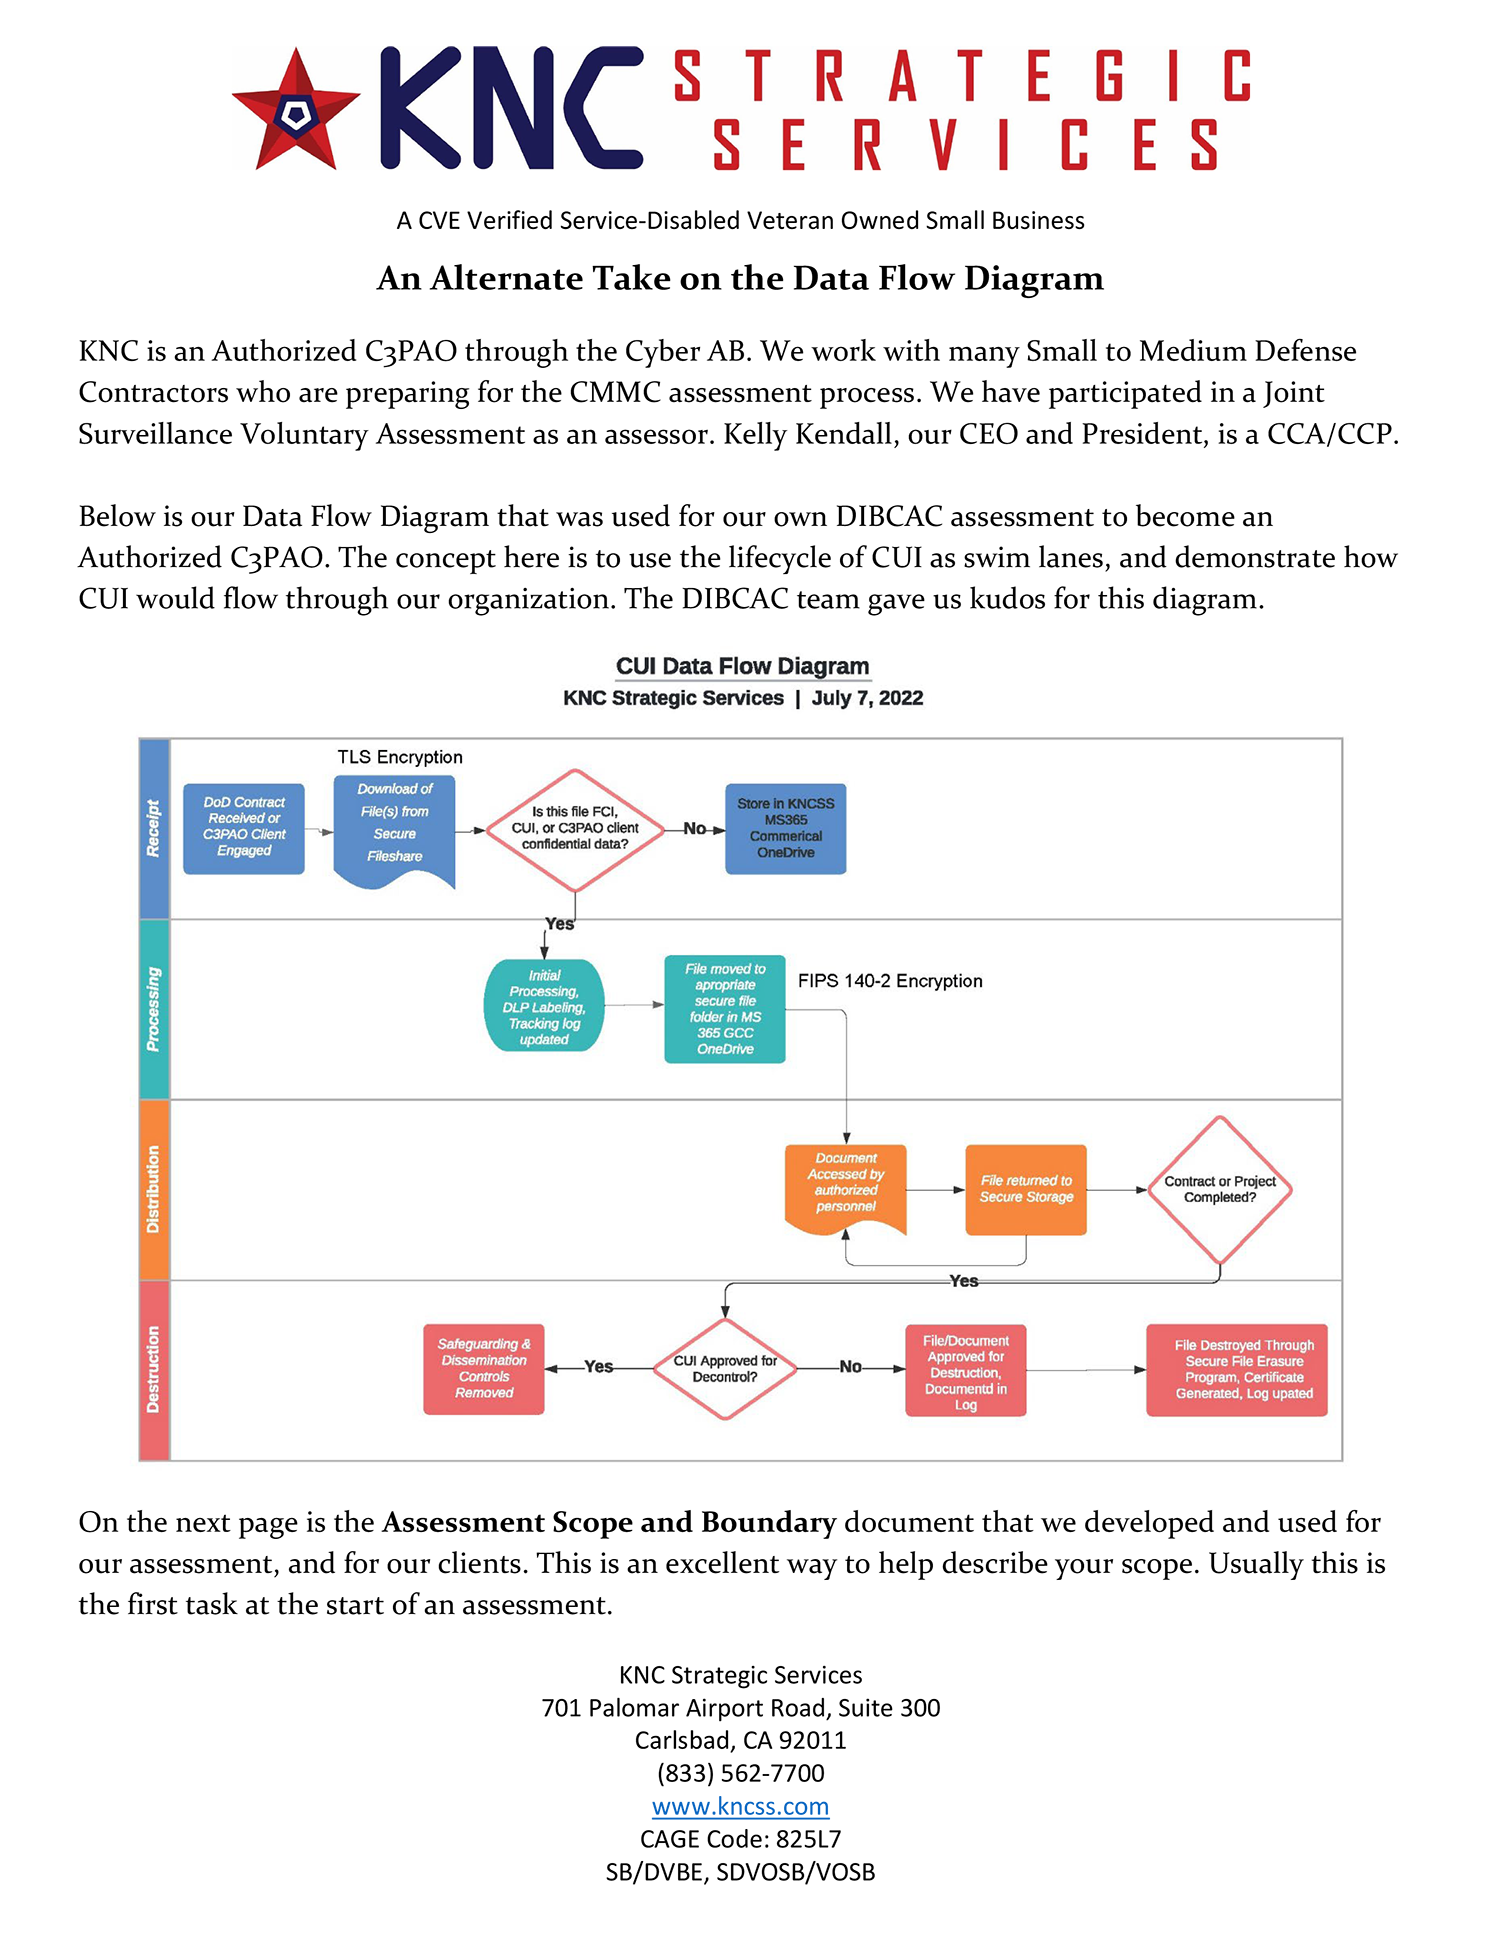 KNCSS An Alternate Take on the Data Flow Diagram-1.png